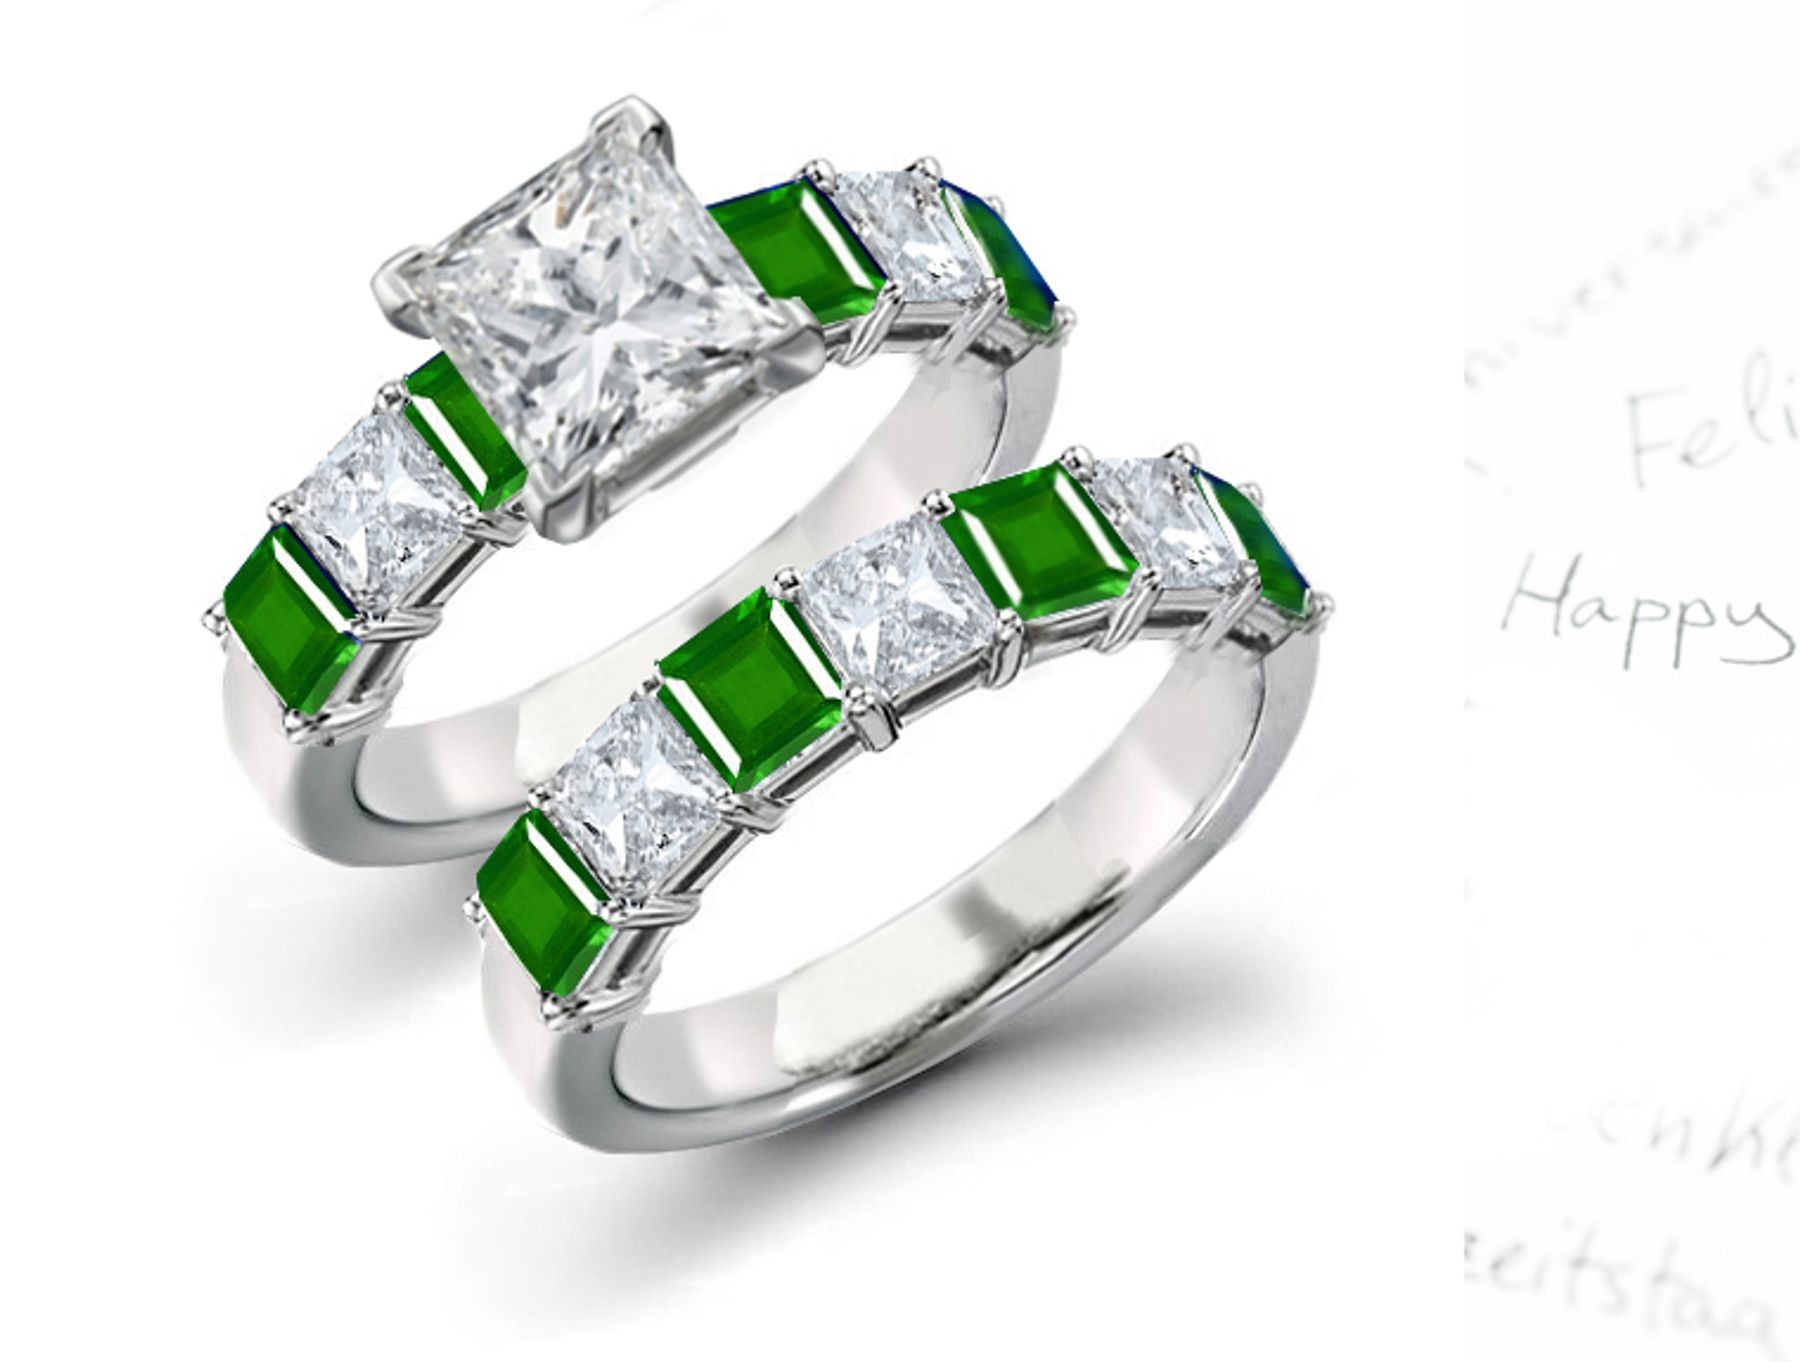 This is a Beautiful 7 Stone Princess Cut Emerald & Diamond Ring and 7 Stone Princess Cut Diamond & Women's Band